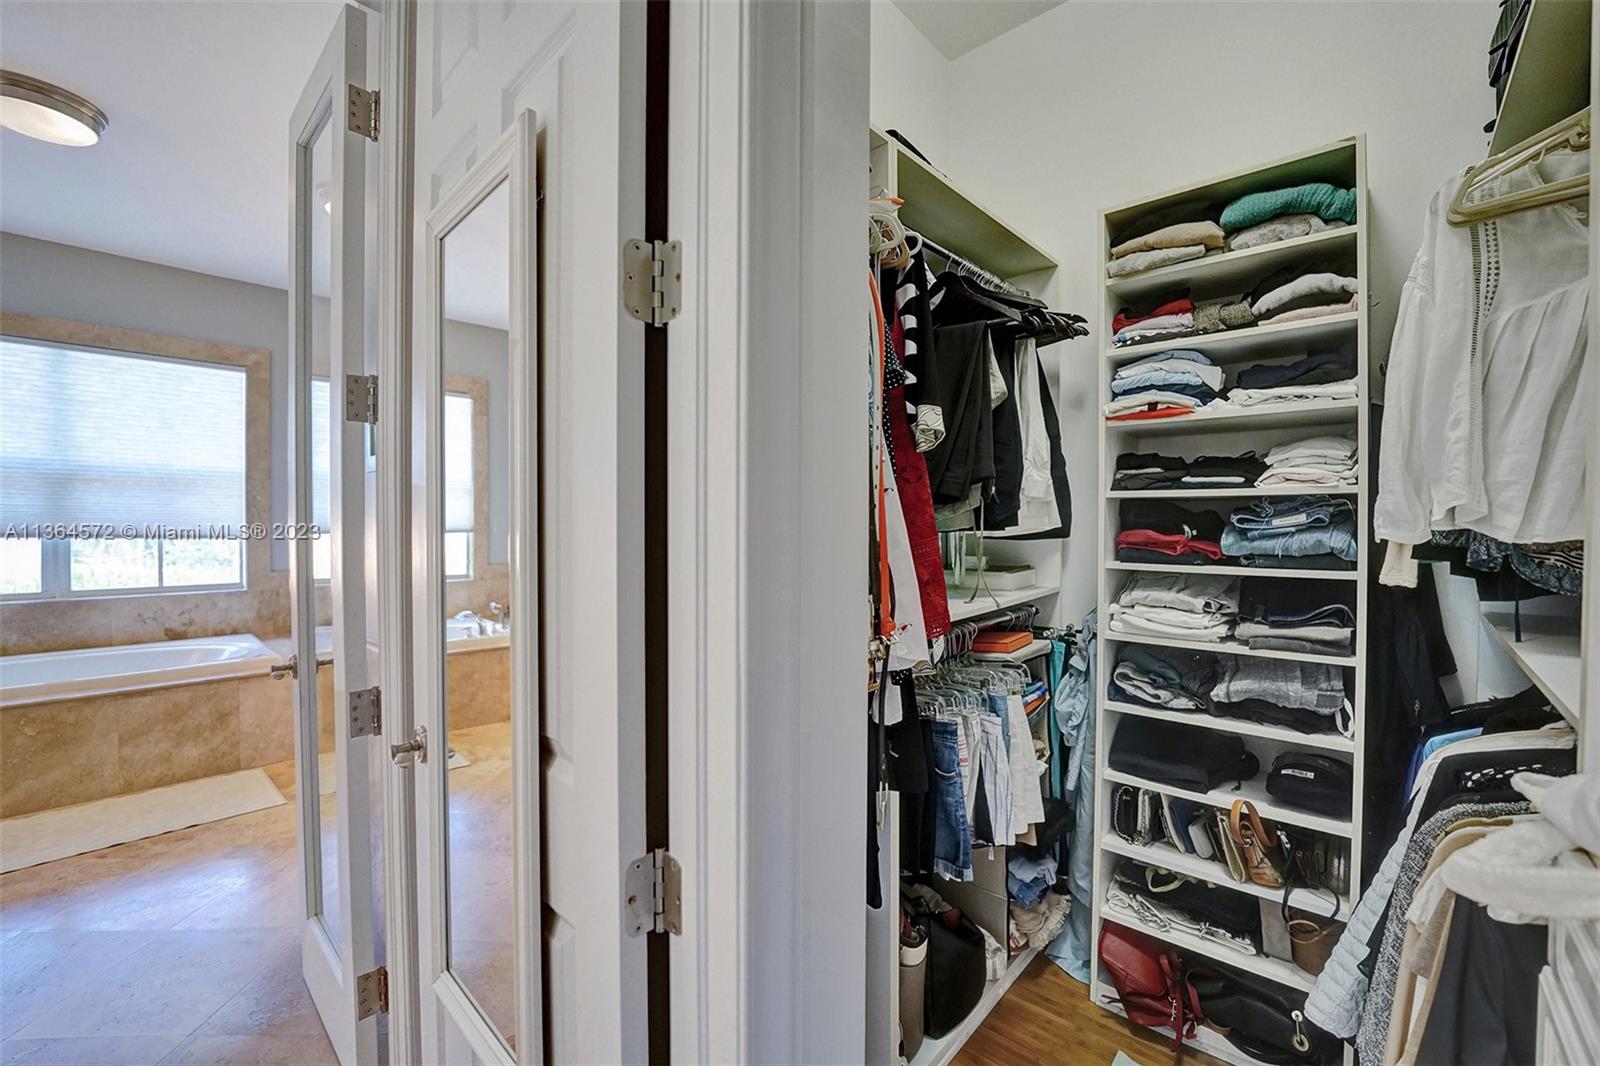 ONE OF 2 WALK-IN CLOSETS